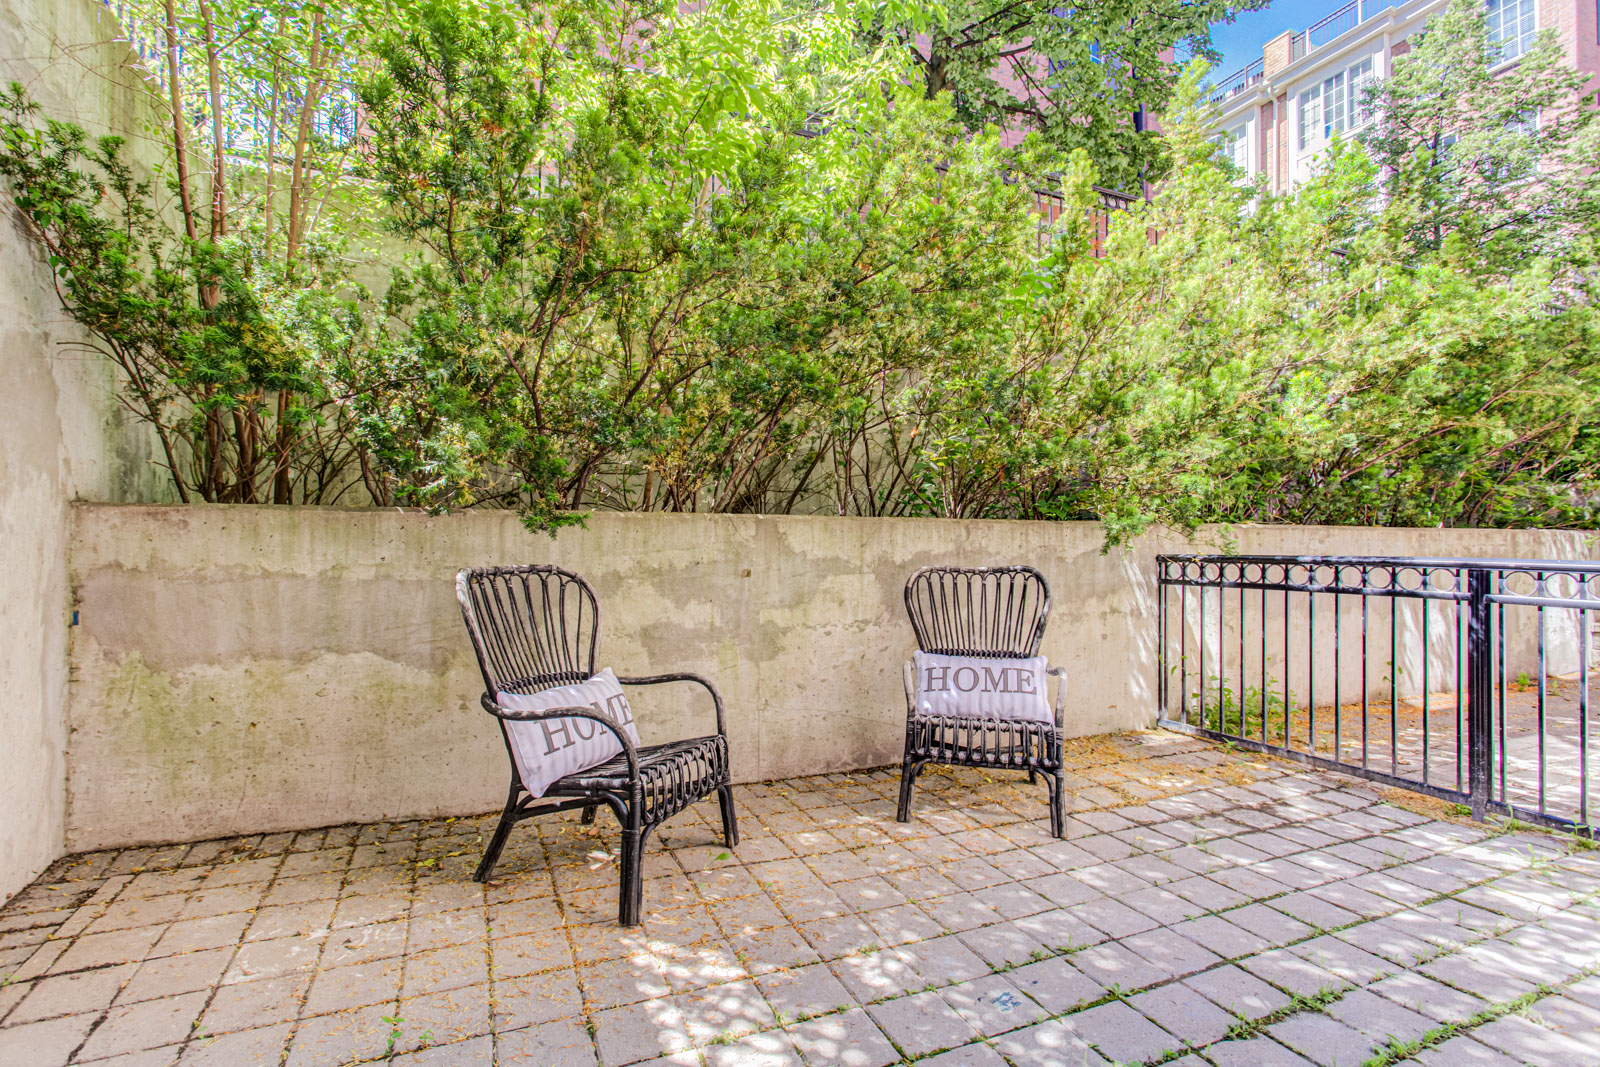 Large rear terrace with 2 metal chairs with white pillows that say “Home.”